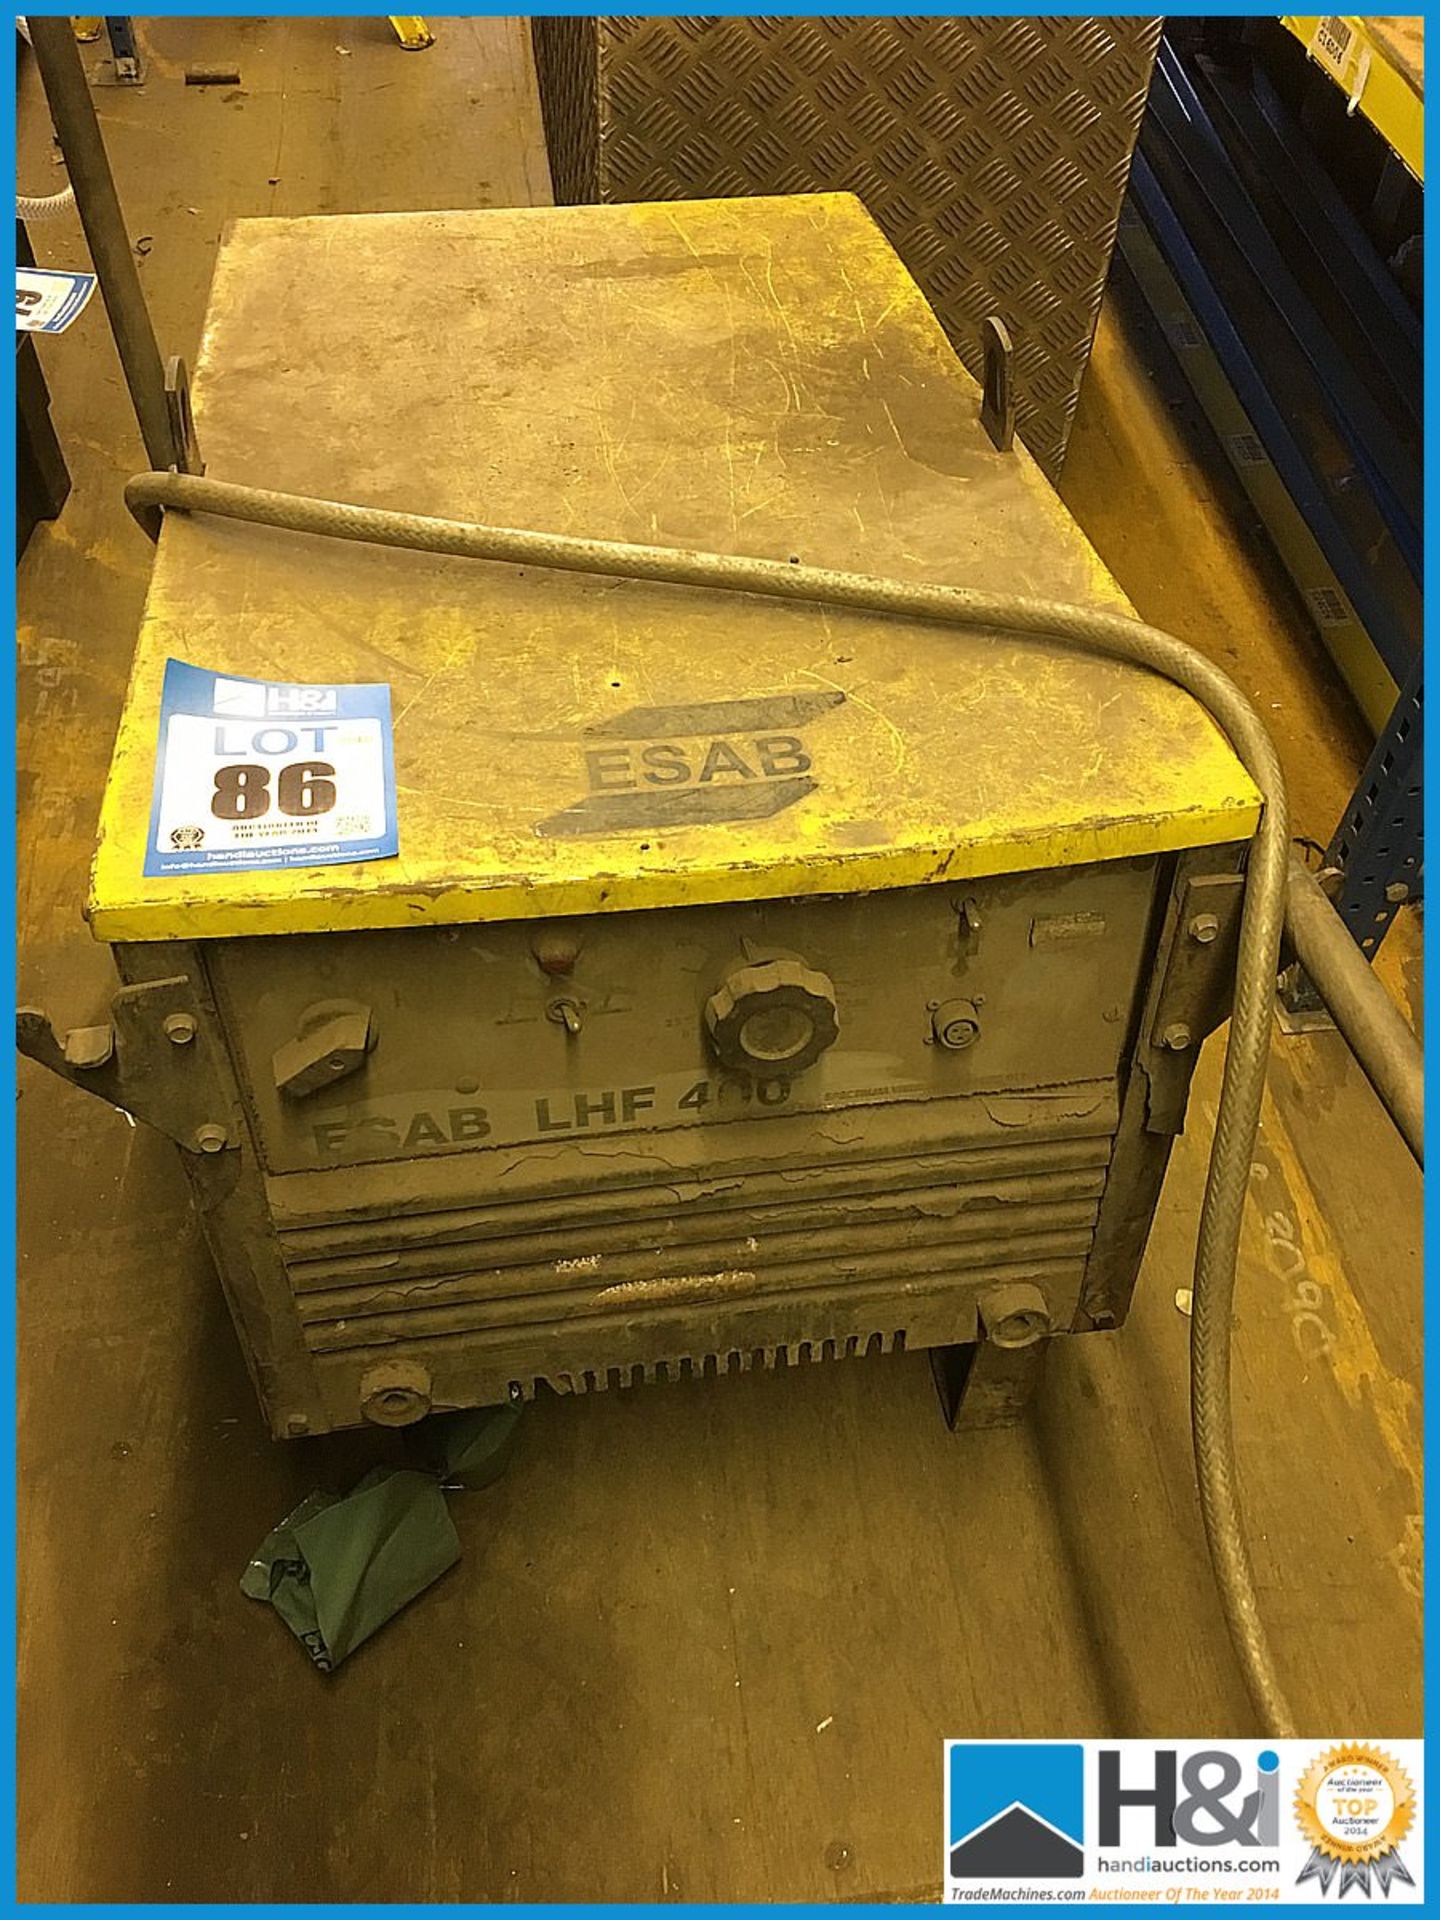 Esab lhf 400 portable arc welder. No VAT on this lot except on the buyers premium Appraisal: Viewing